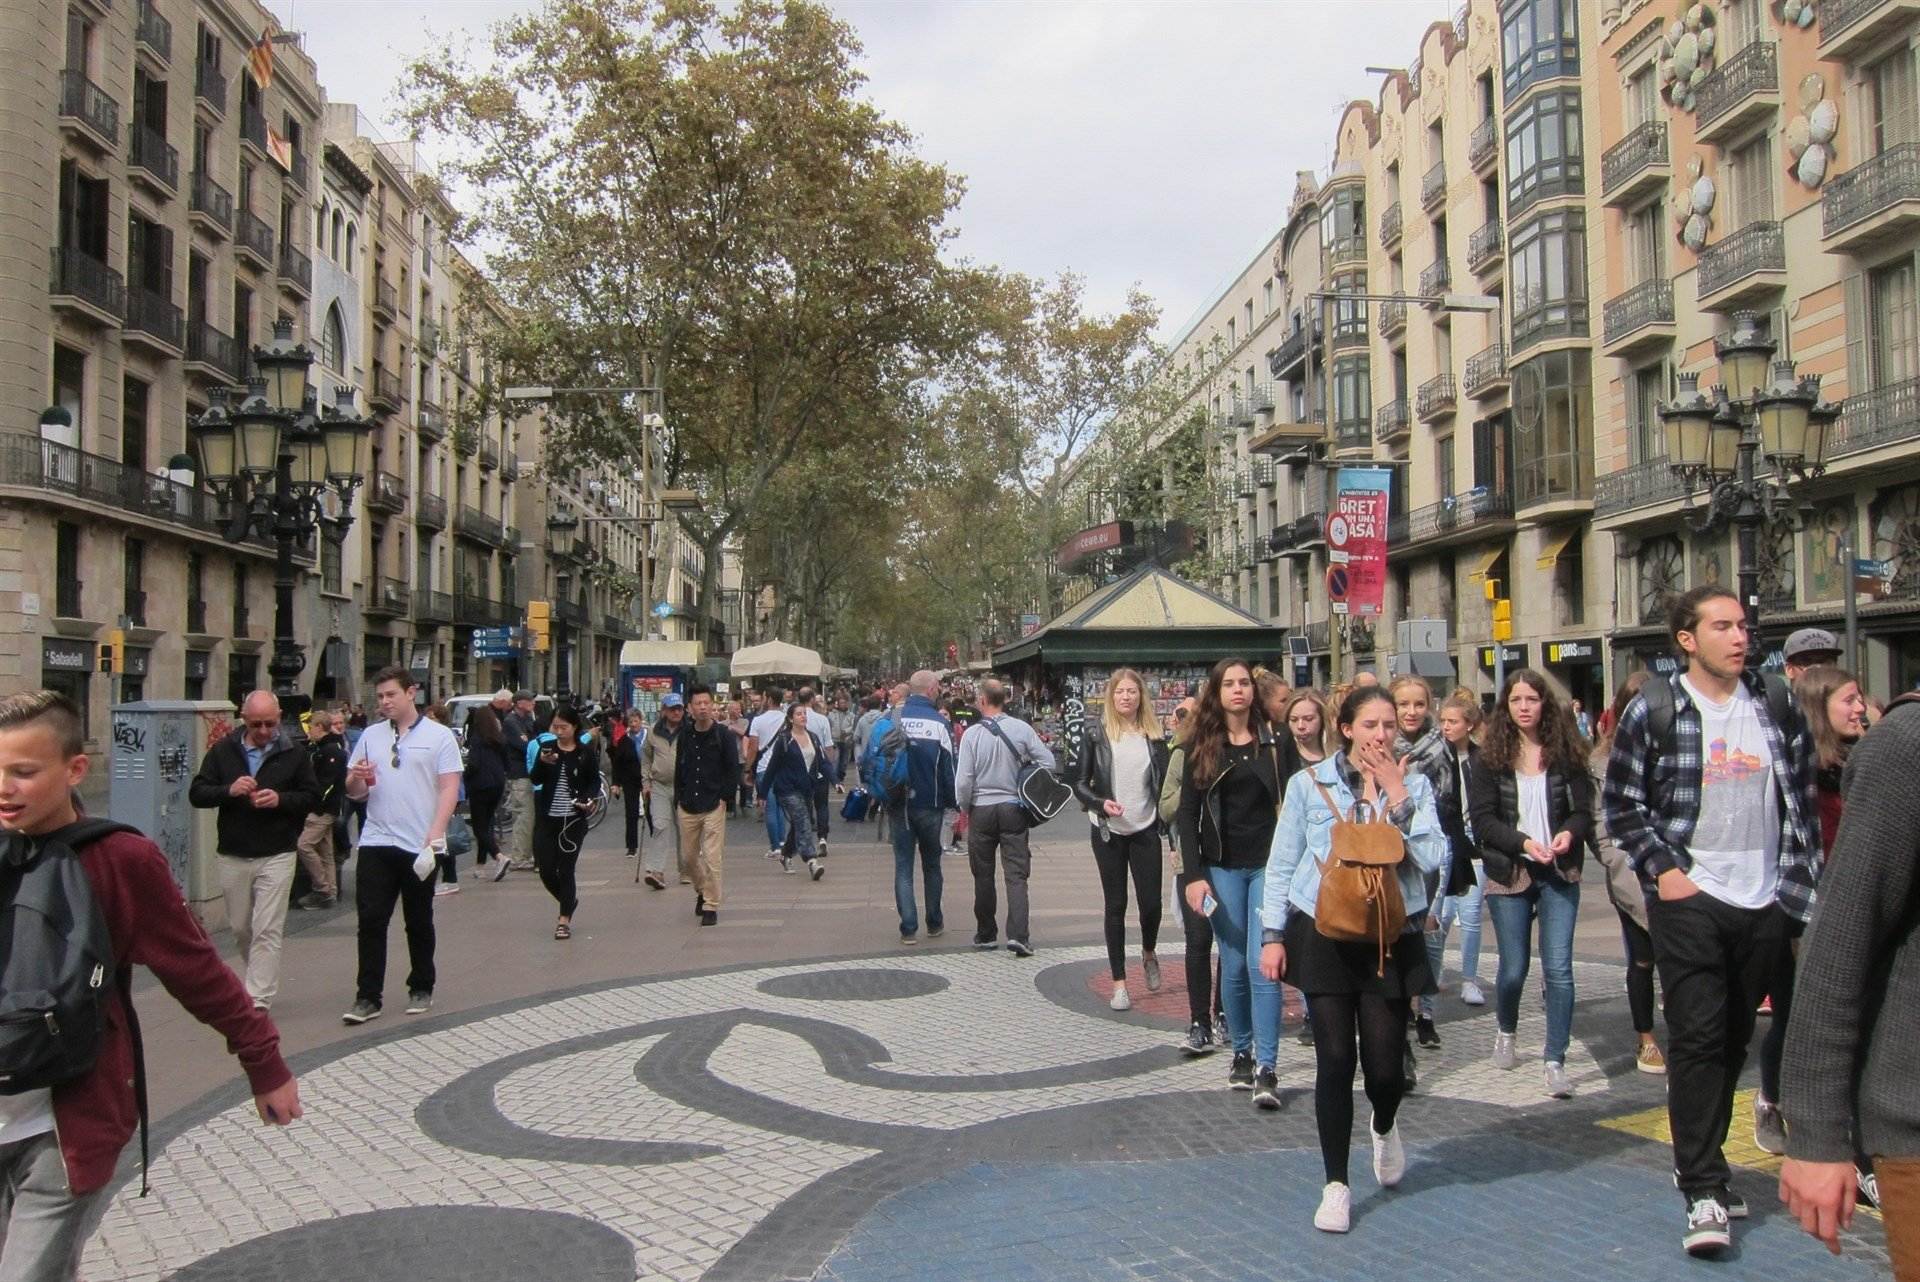 Anti-terrorism patrols in Barcelona to continue till after January 6th